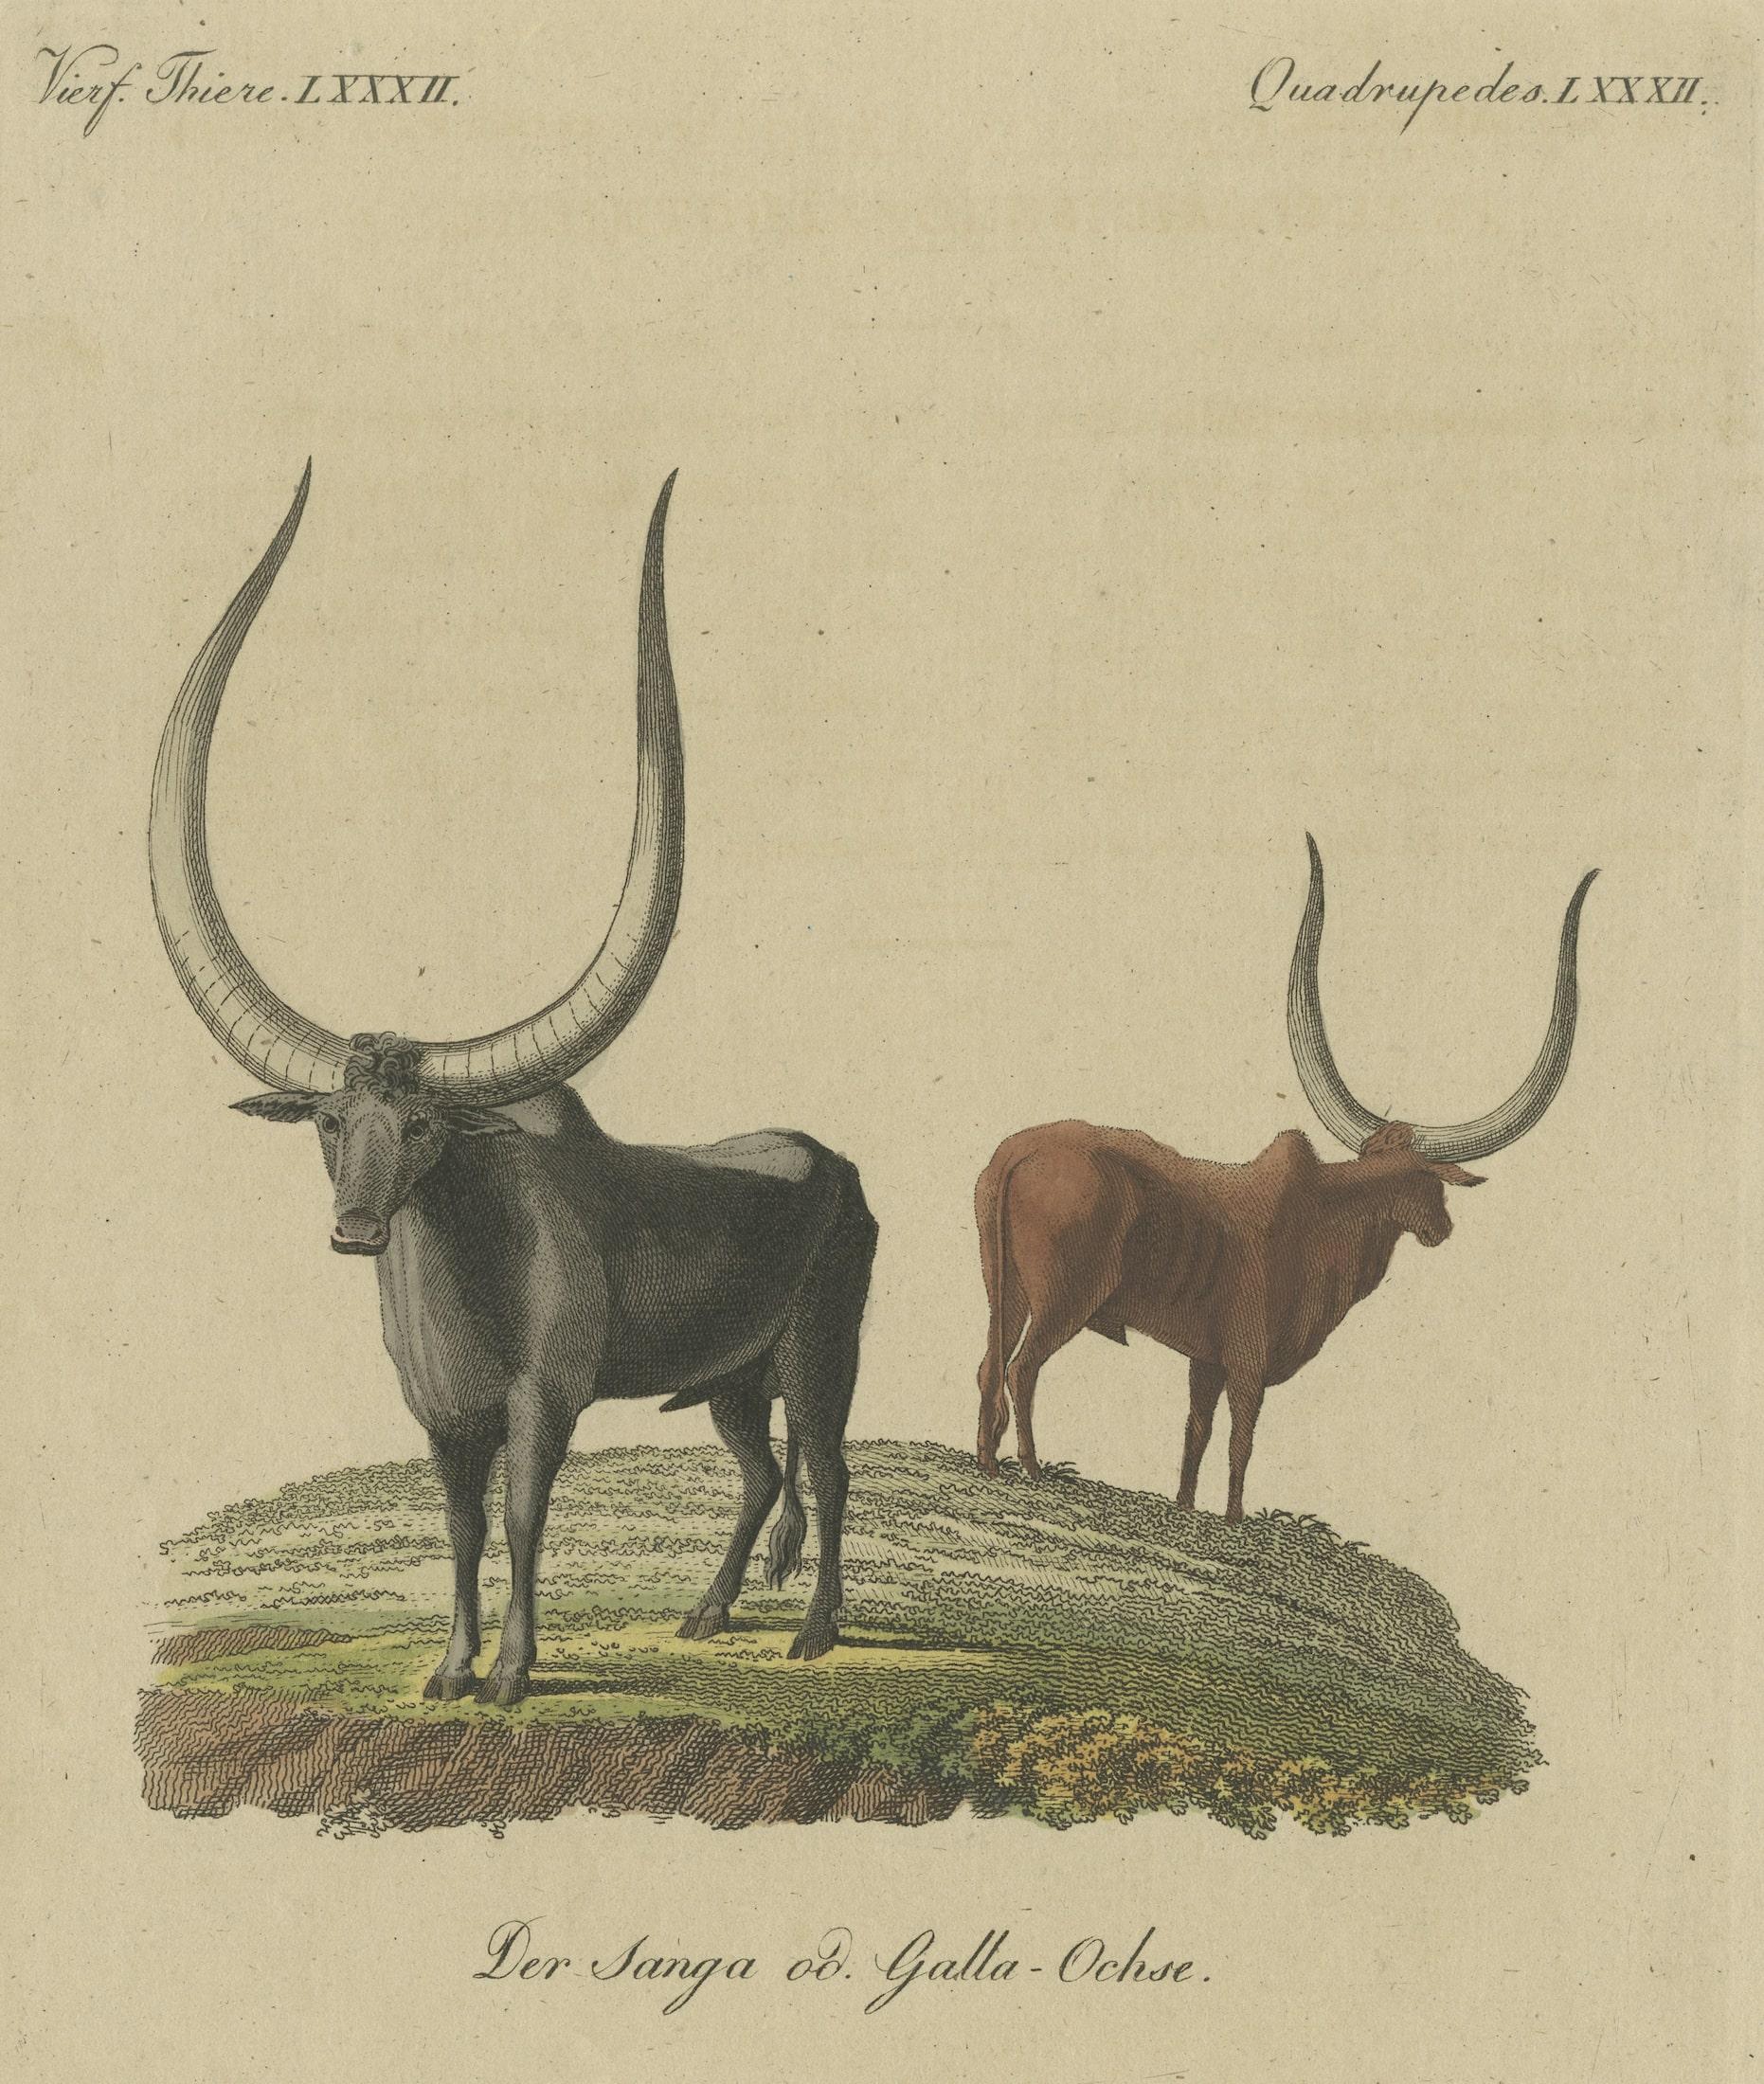 19th Century Original Hand-Colored Antique Print of a Sanga Ox 'Bos Africanus' of Africa For Sale